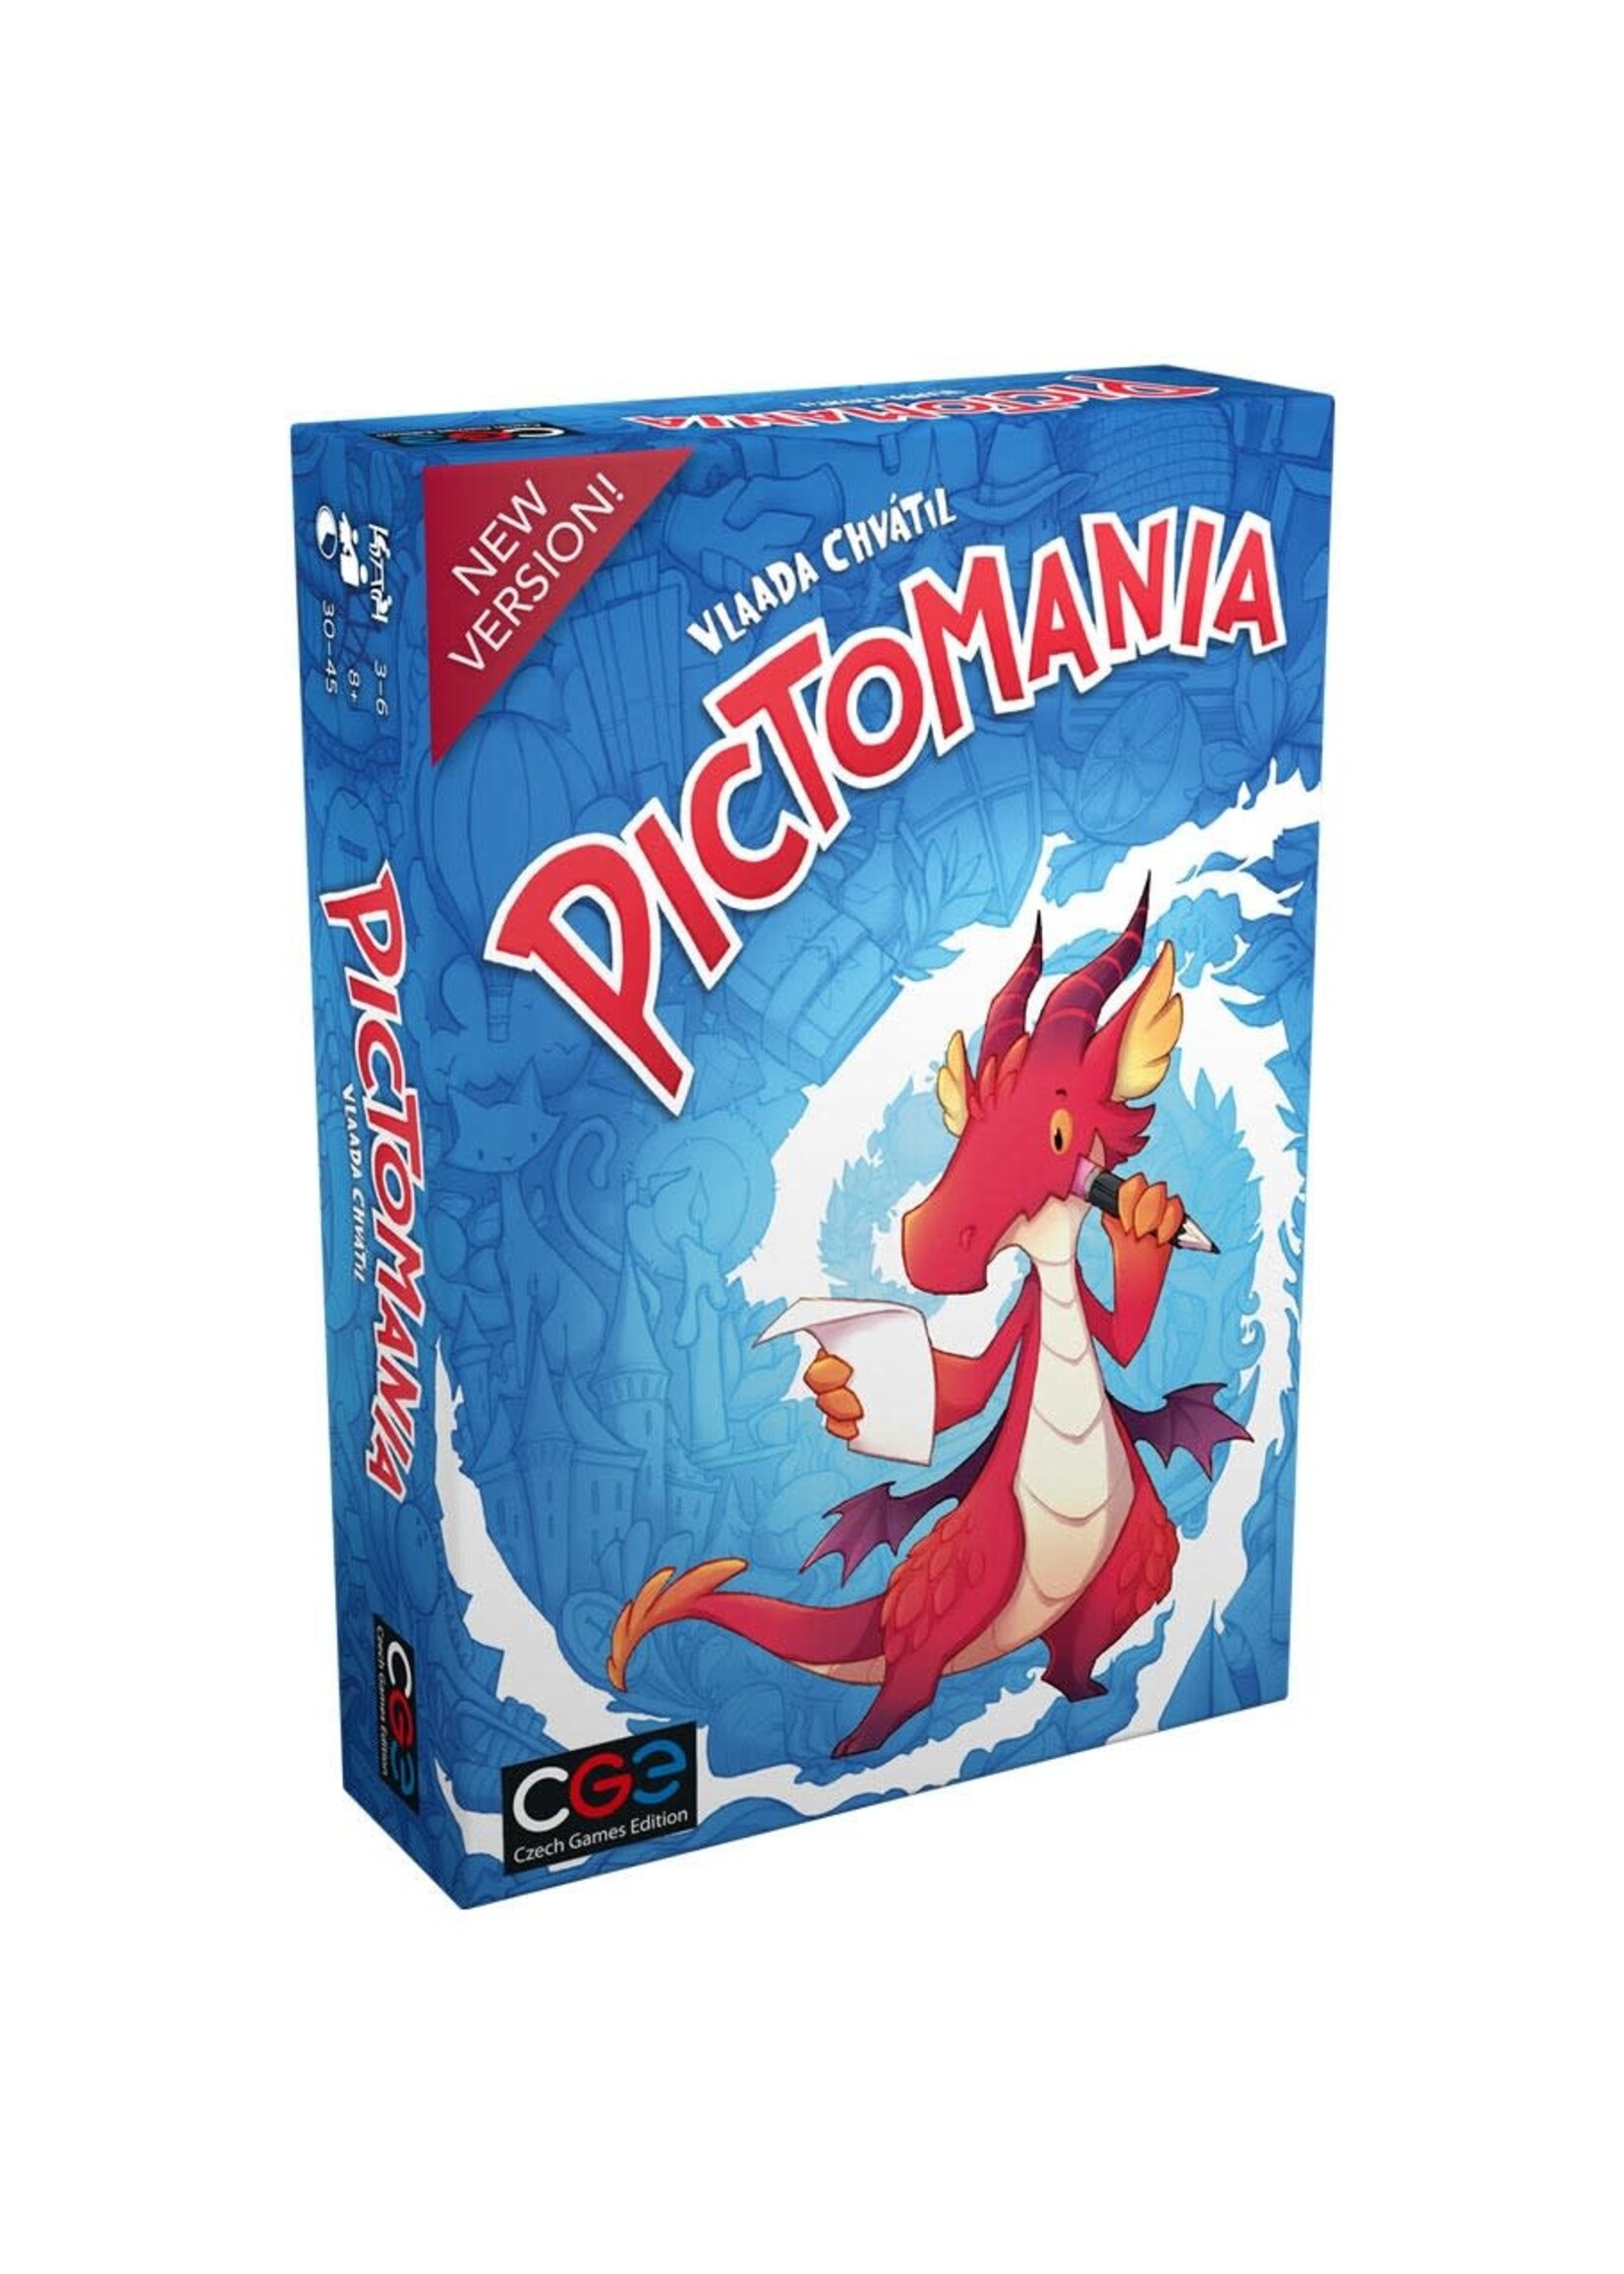 Czech Games Edition Pictomania